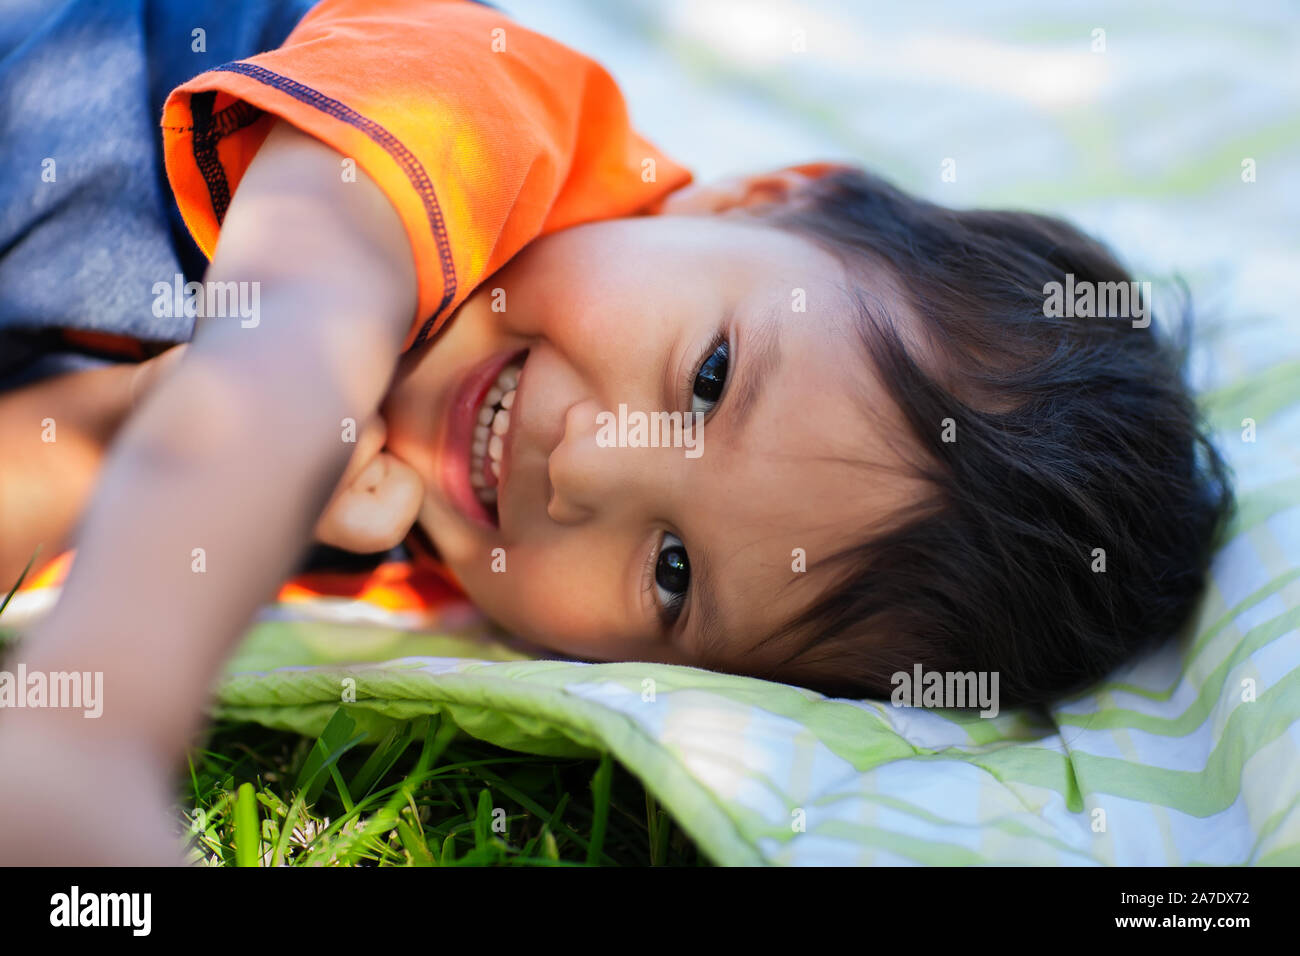 The cute smile of a young boy that is laying down on a picnic blanket, that awoke from a daytime nap. Stock Photo